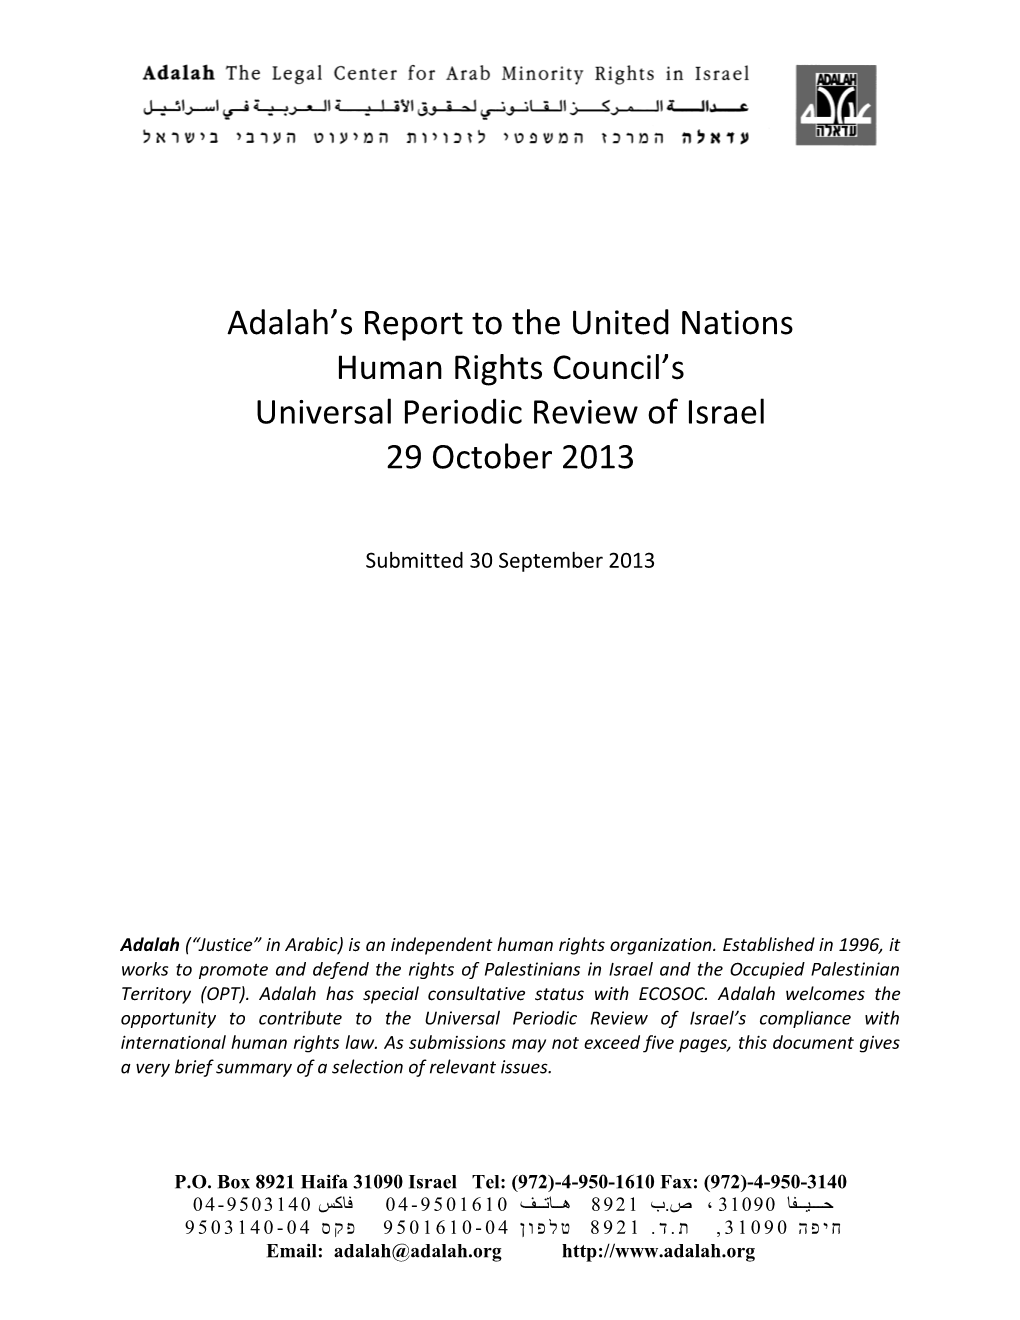 Adalah's Report to the United Nations Human Rights Council's Universal